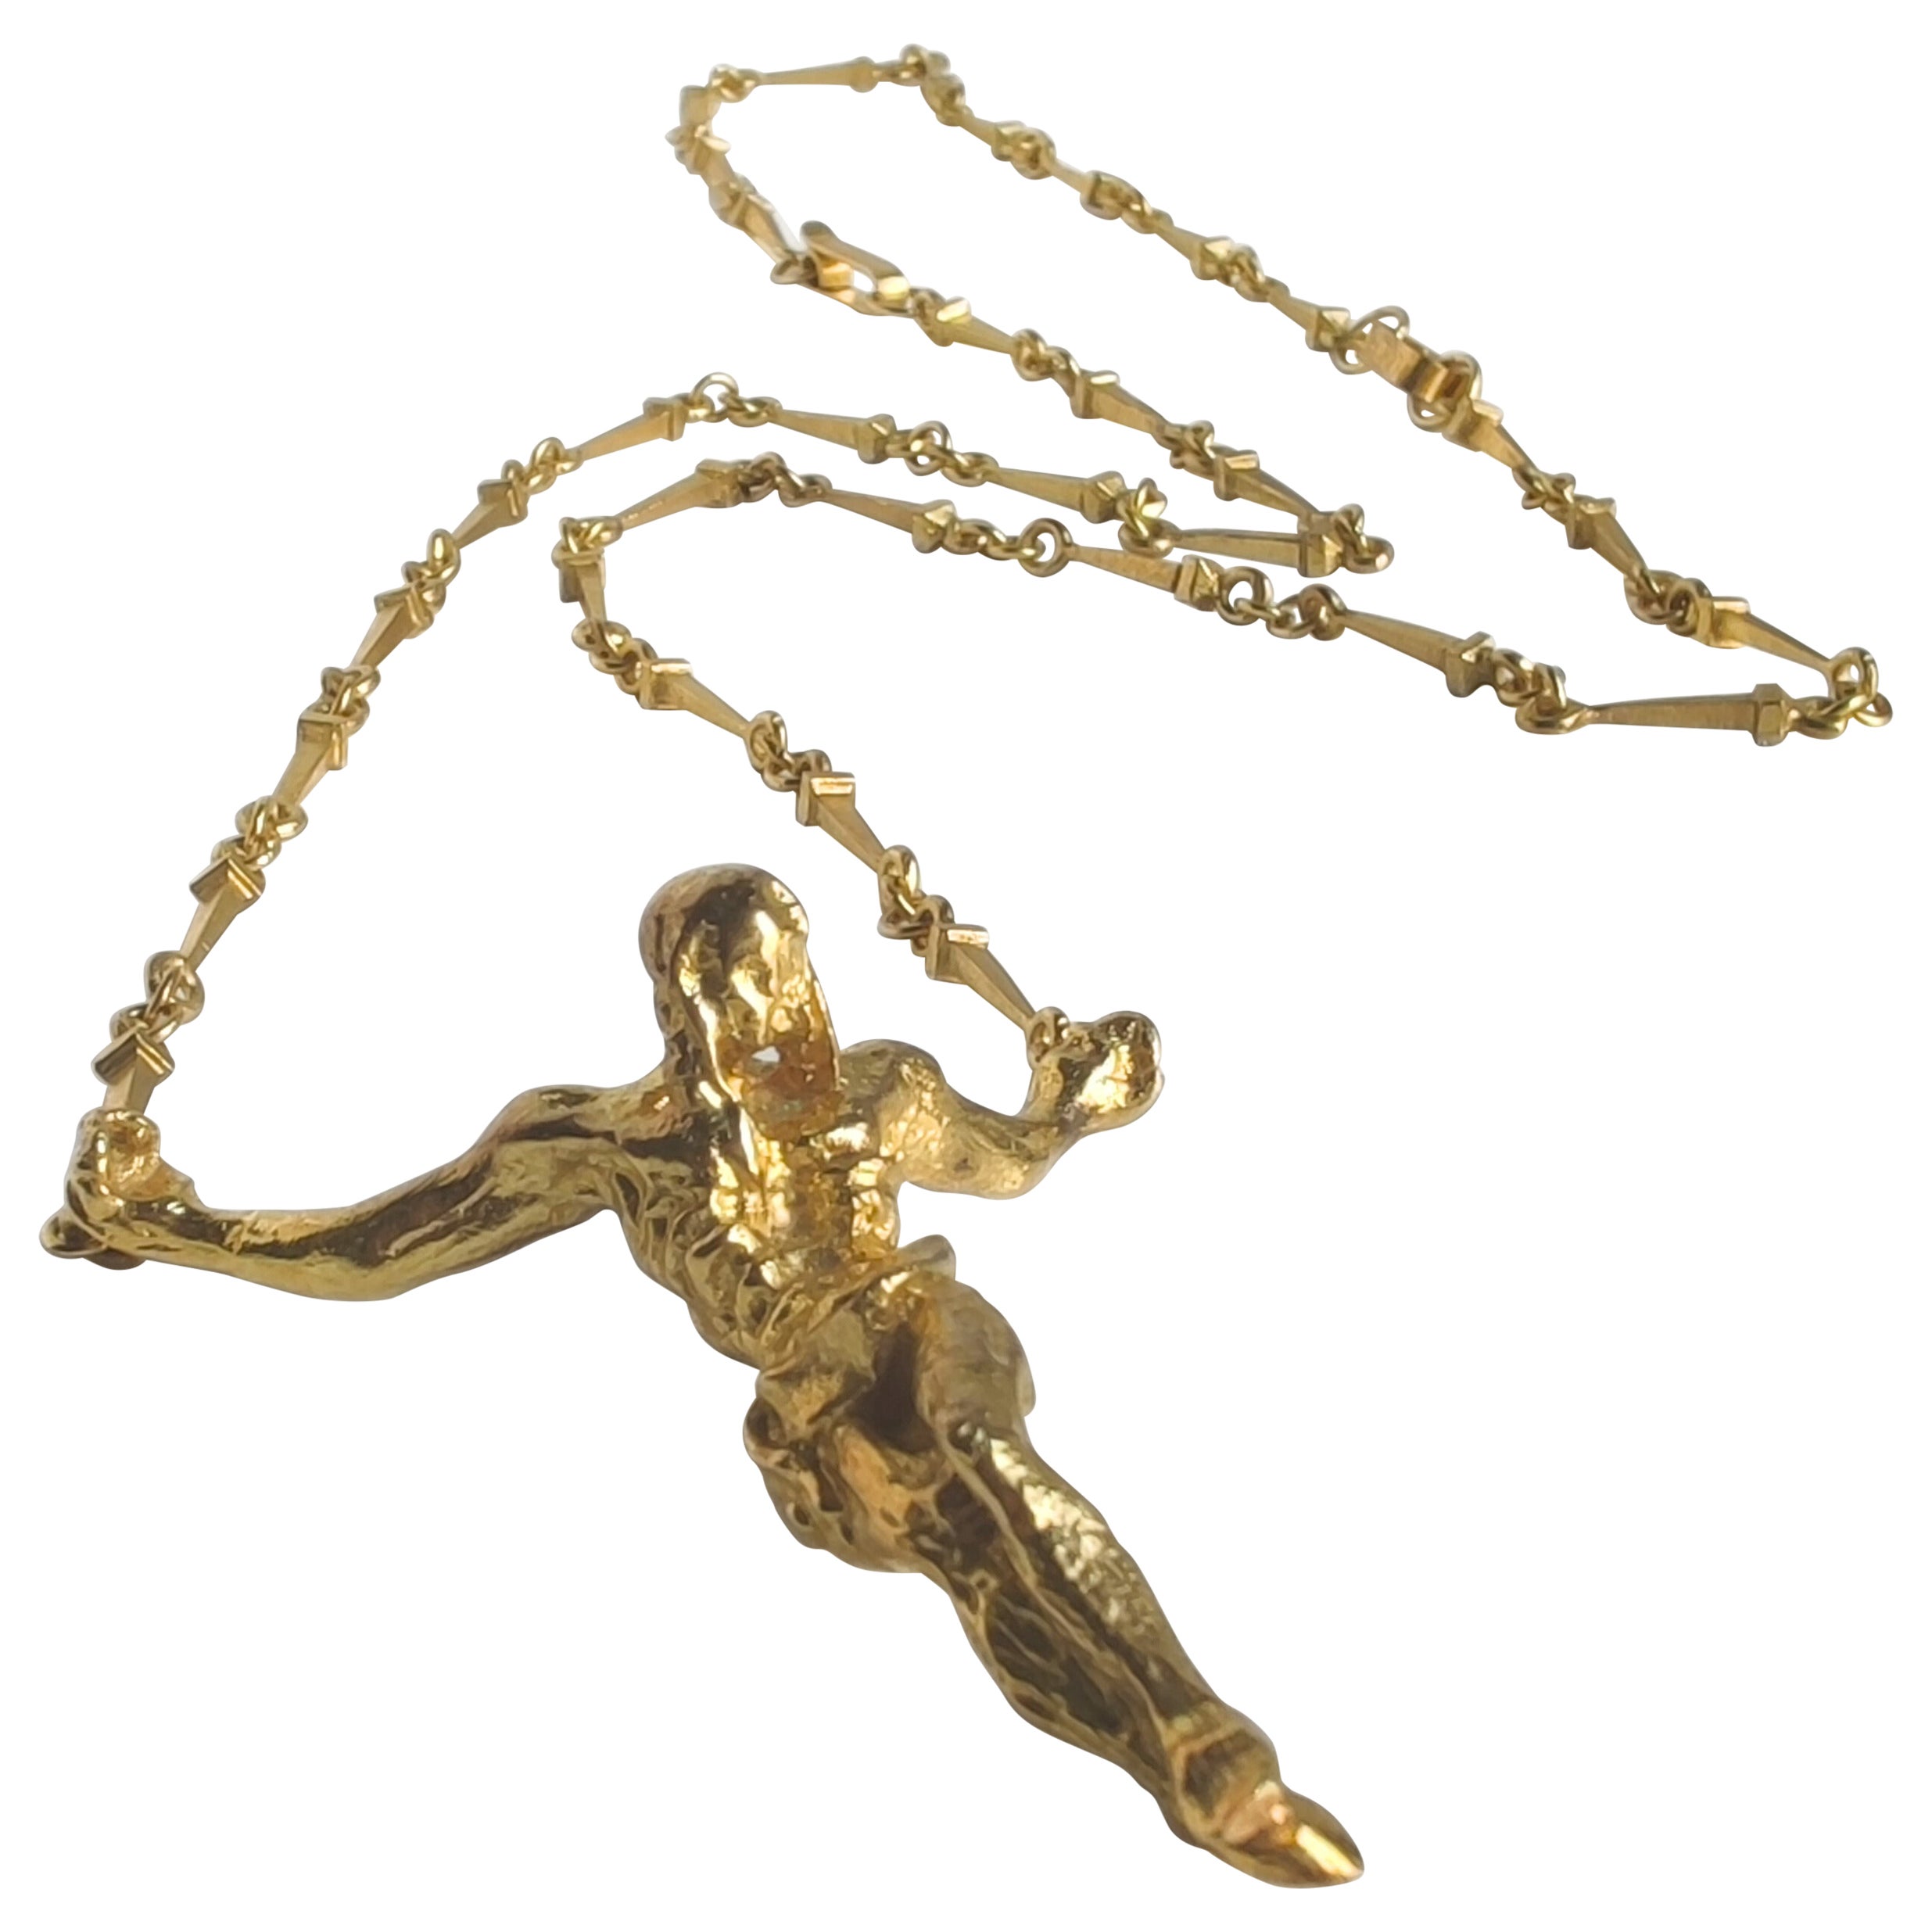 Exclusive Dalí 18K solid gold 'St. John Cross' Necklace #A-821 - With Provenance